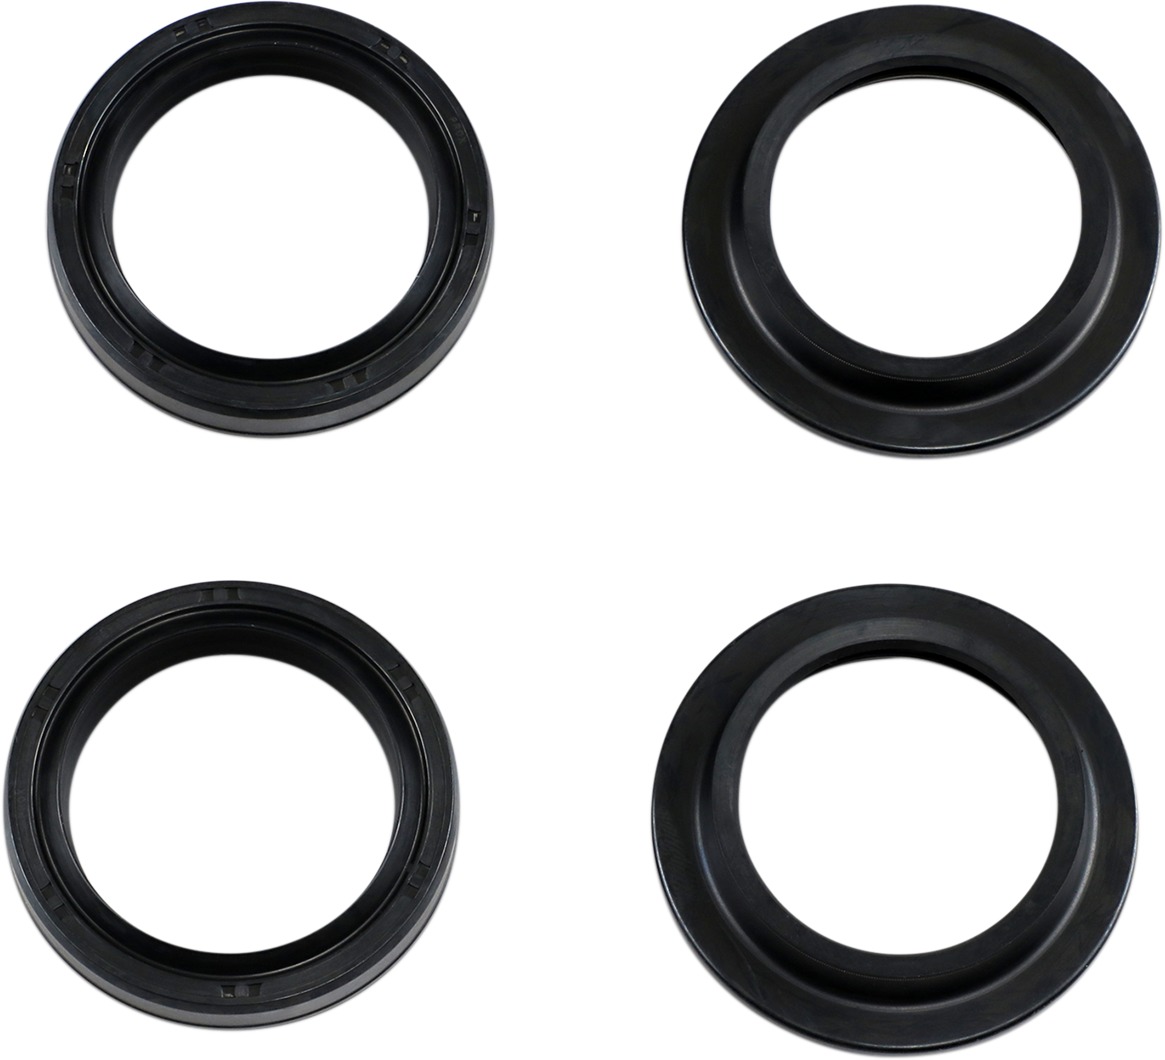 Fork Seal & Dust Wiper Kit - 92-18 KX80/85/100 & 93-20 YZ80/85 - Click Image to Close